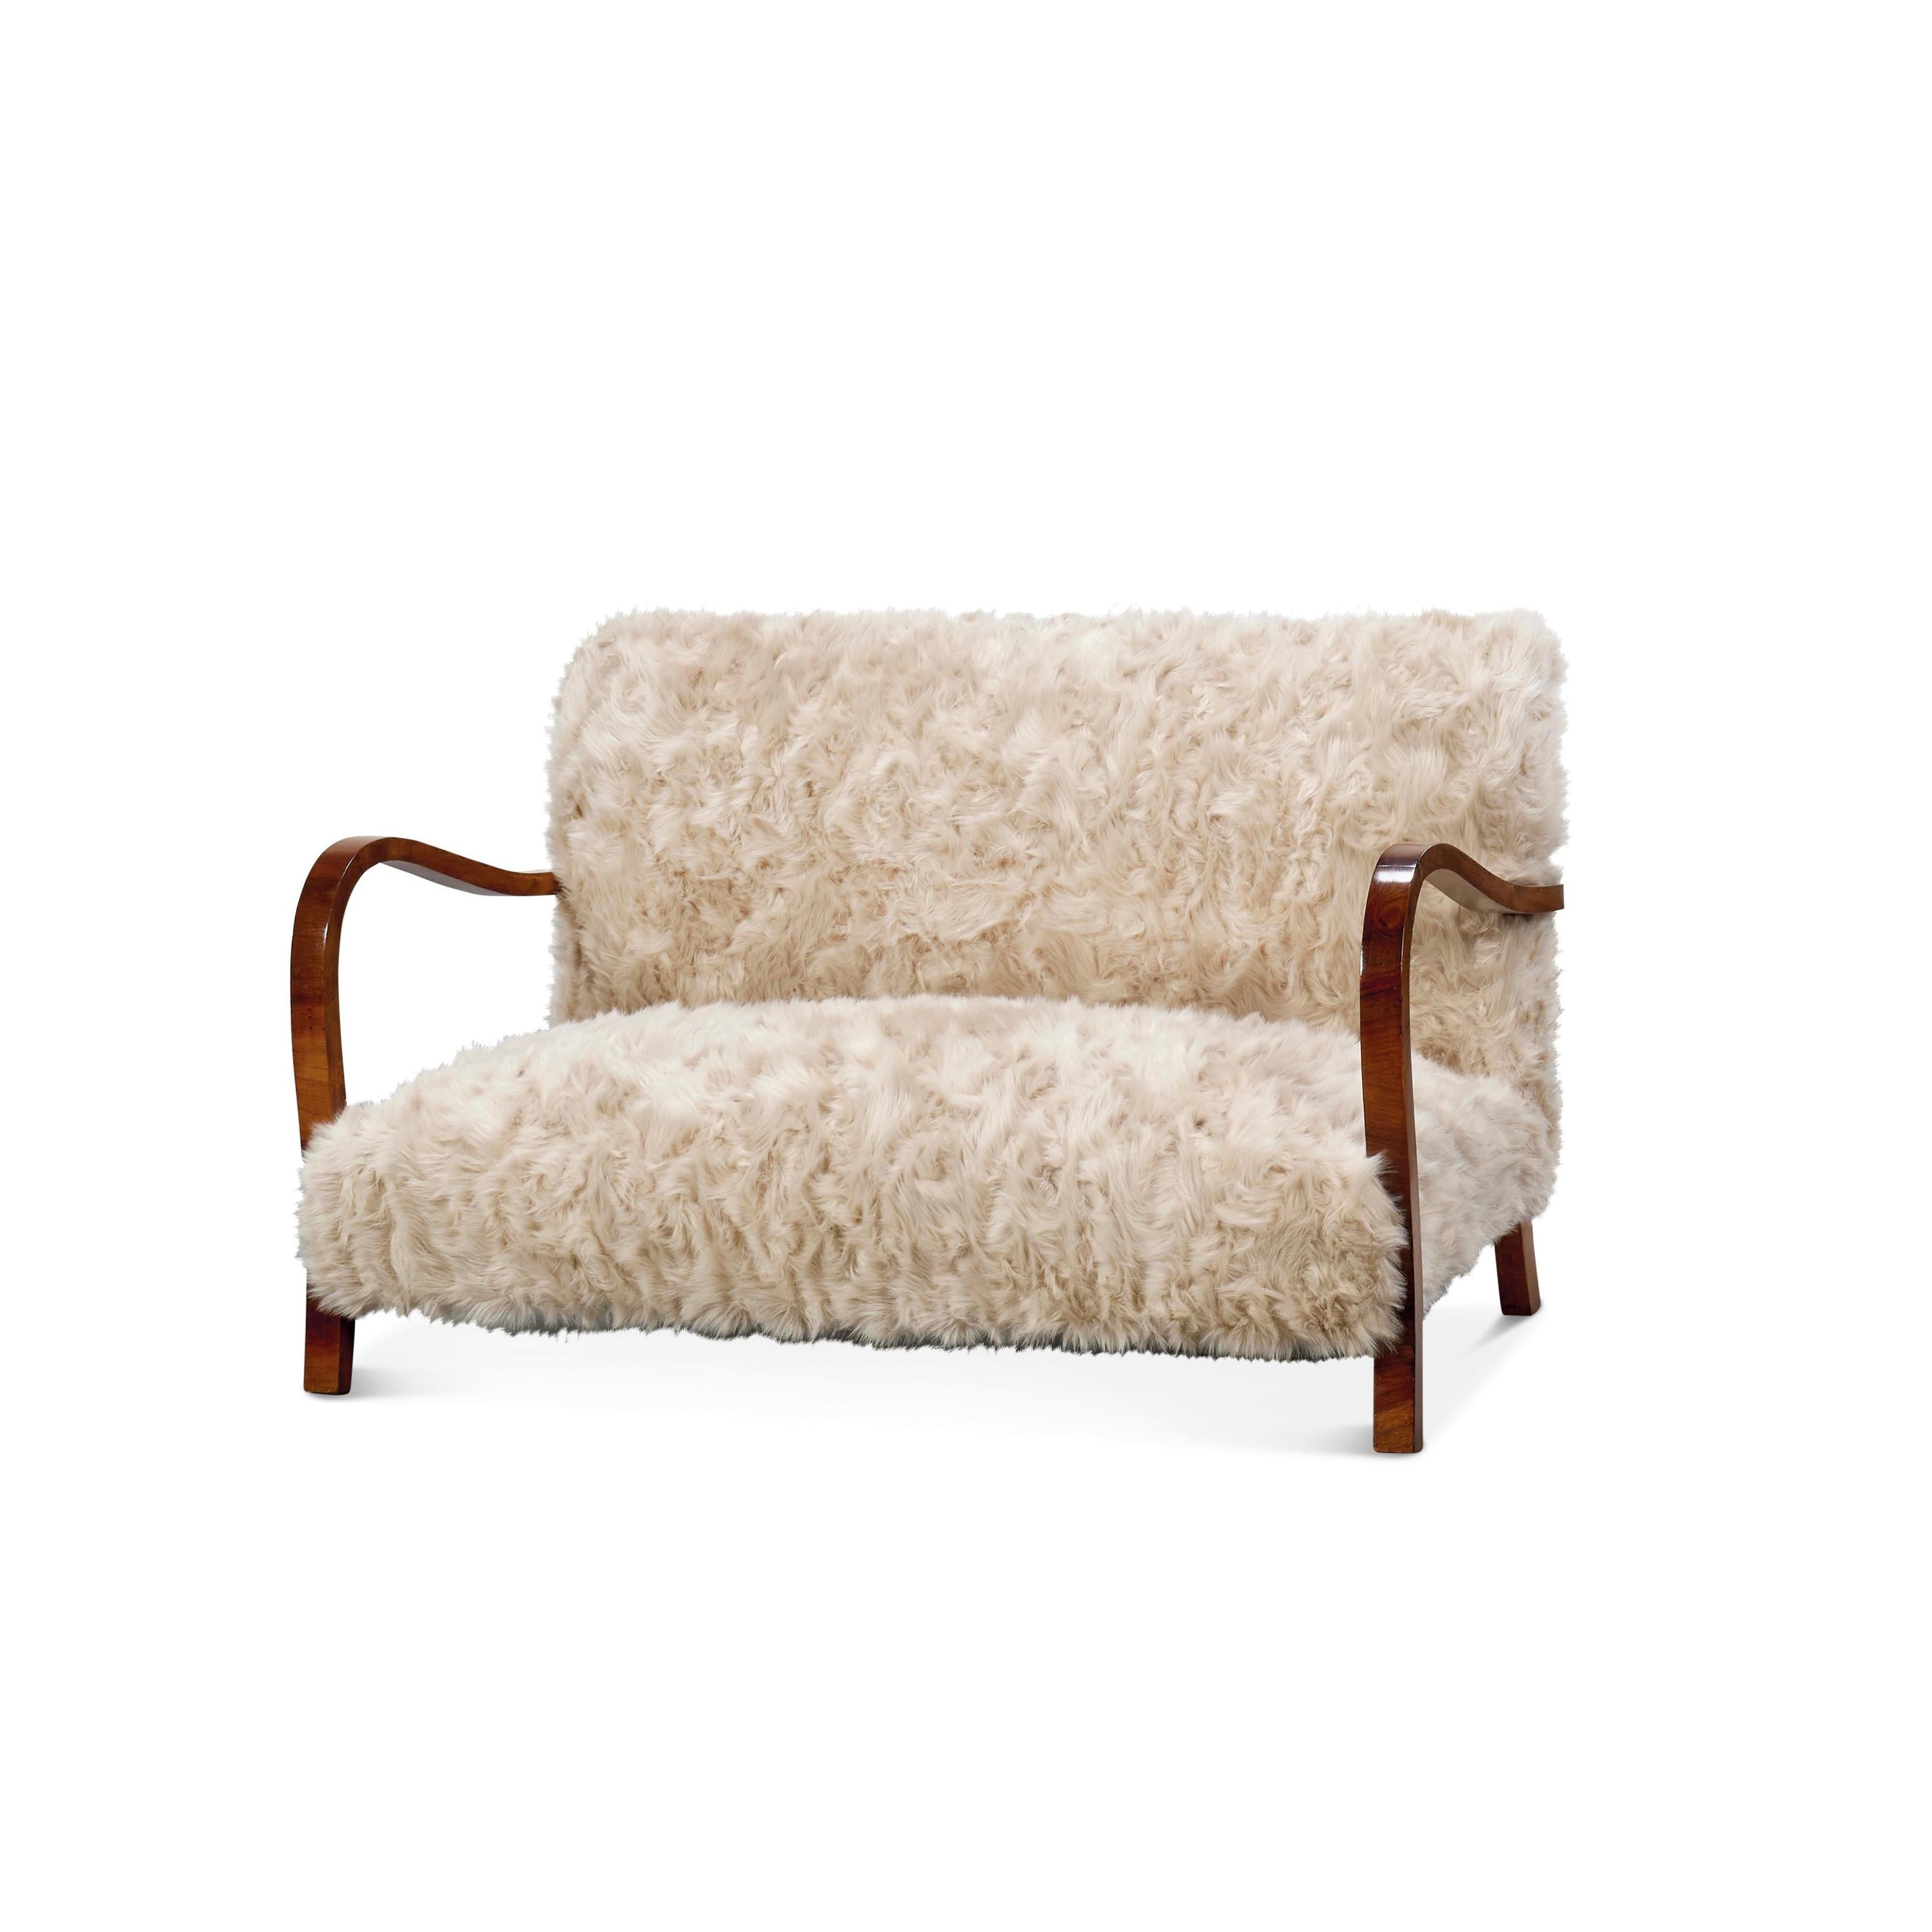 Mid-Century Sofa from 1950s Italy. Upholstered recently in a very soft Faux sheep wool, 
This cozy settee would go beautifully at the end the bed or any other seating area.
